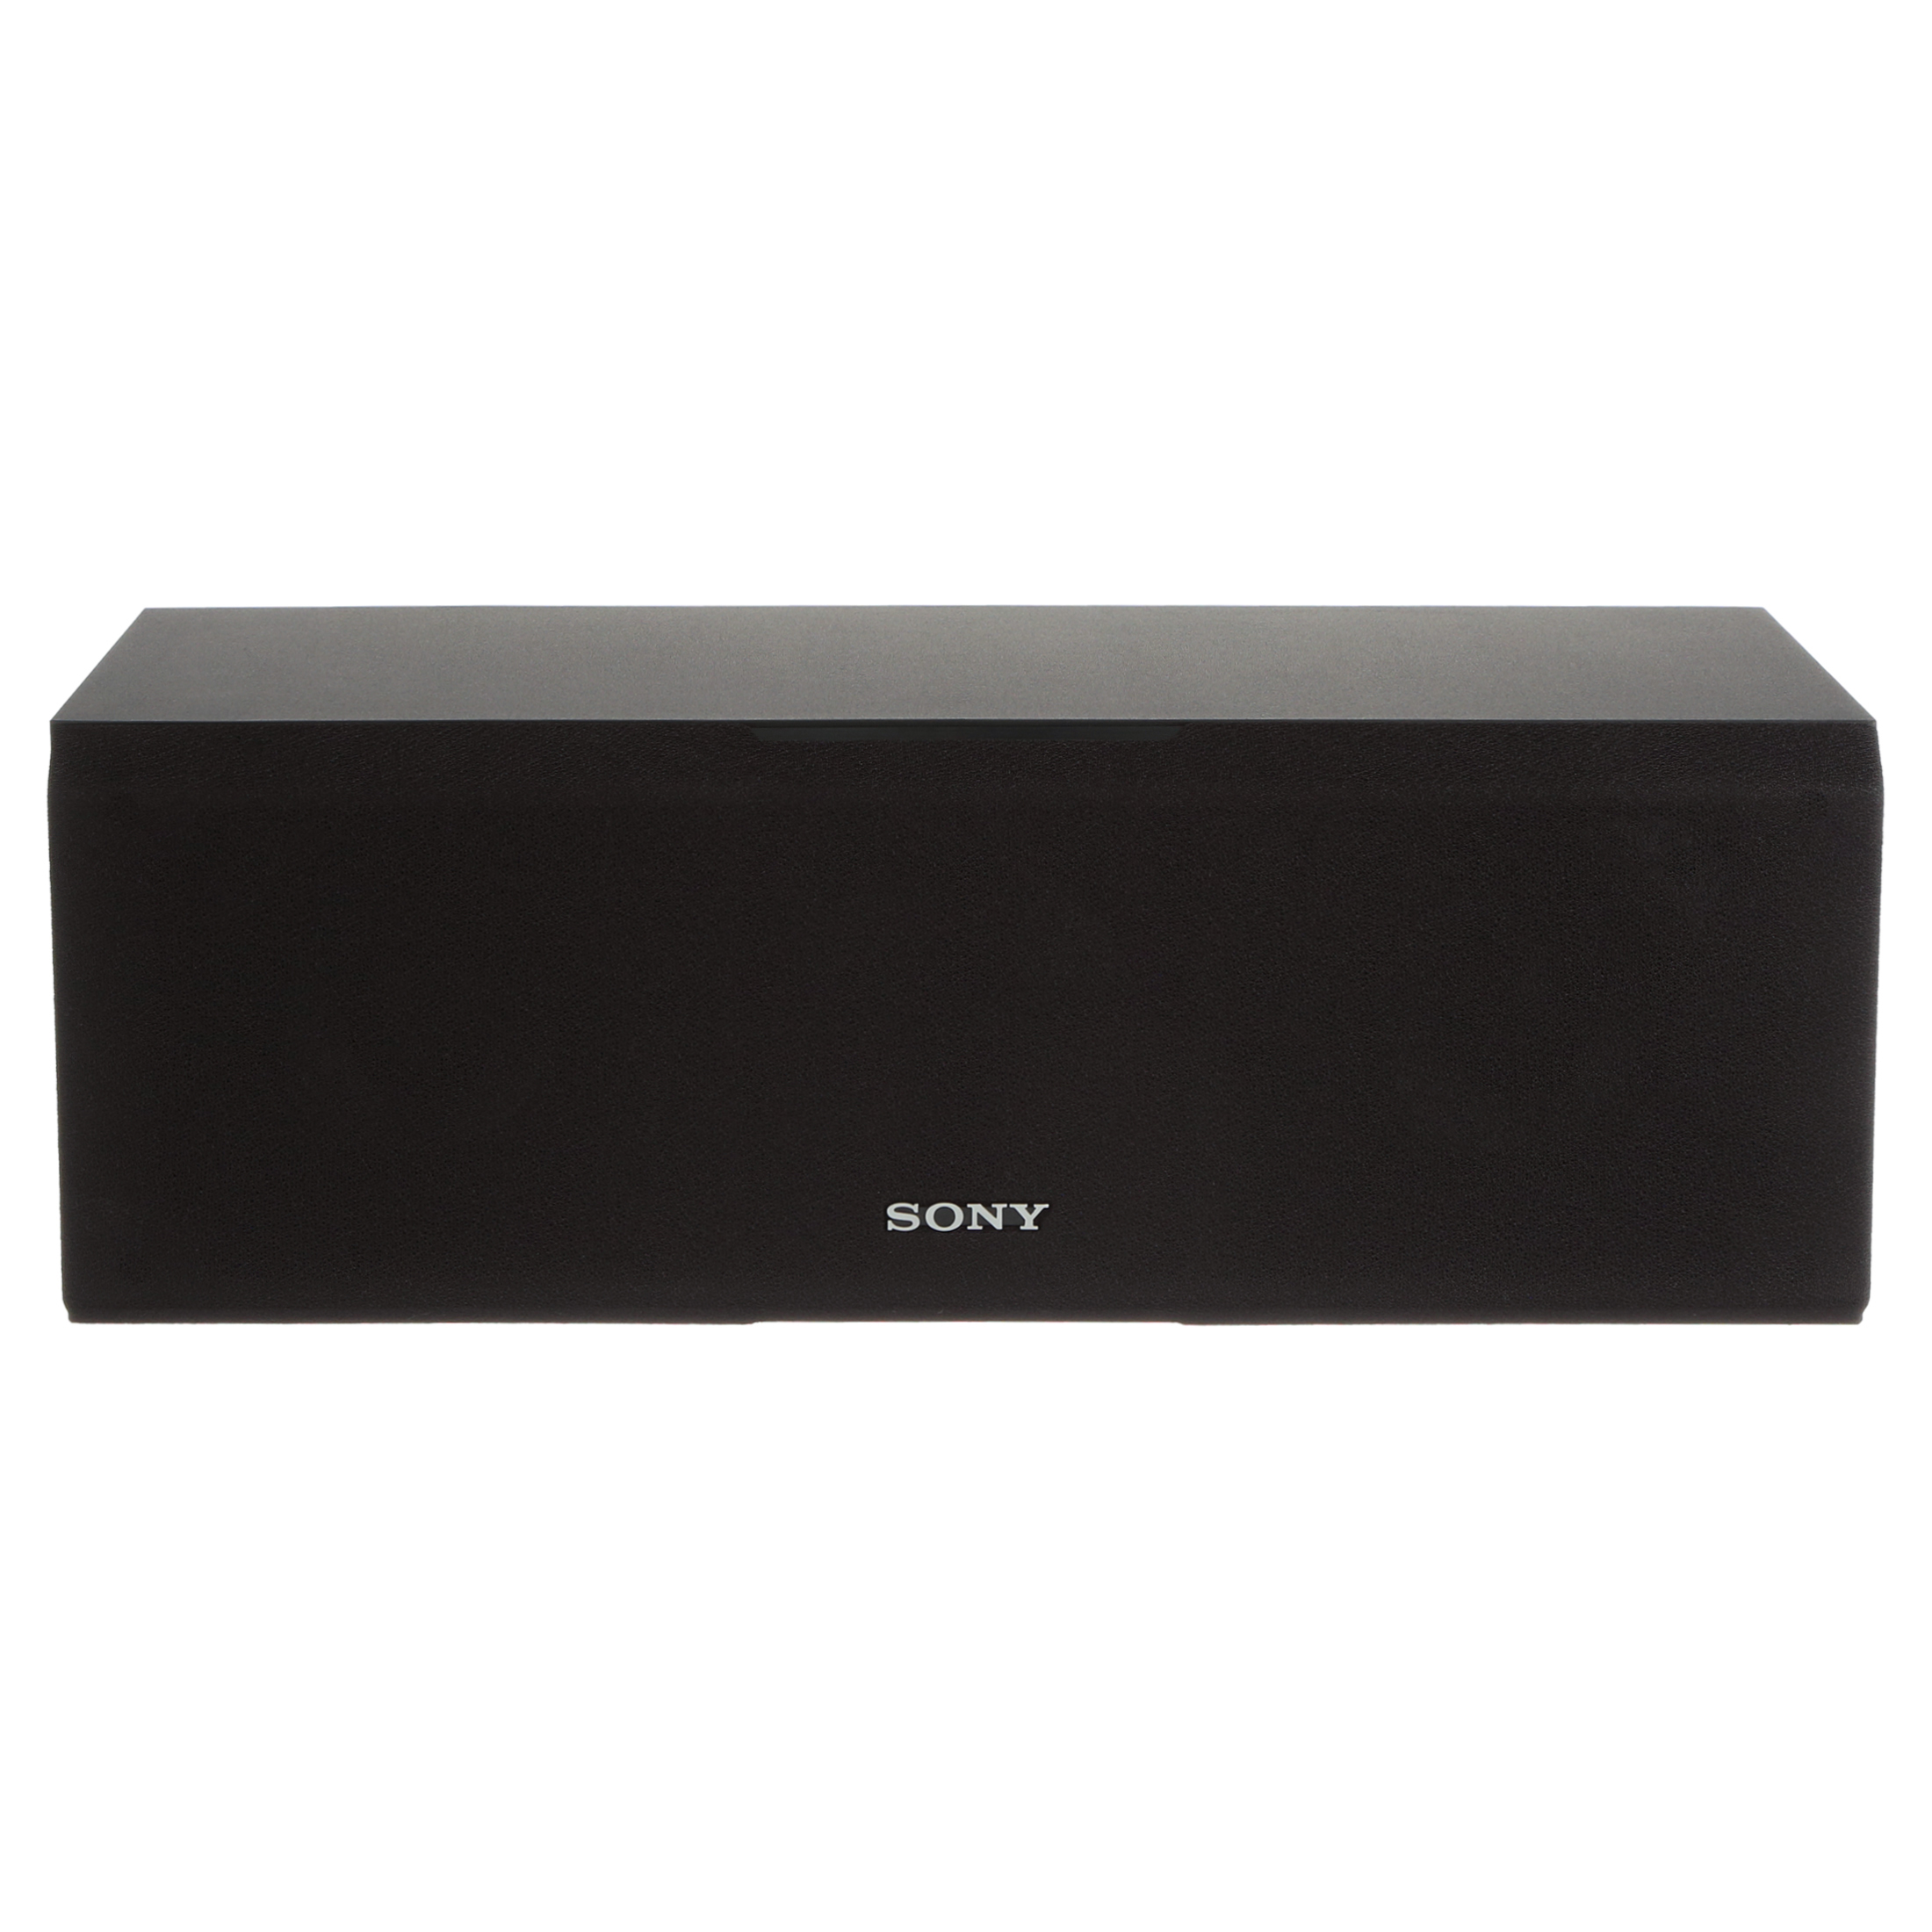 Sony SSCS8 2-Way 3-Driver Center Channel Speaker - Black - image 1 of 5